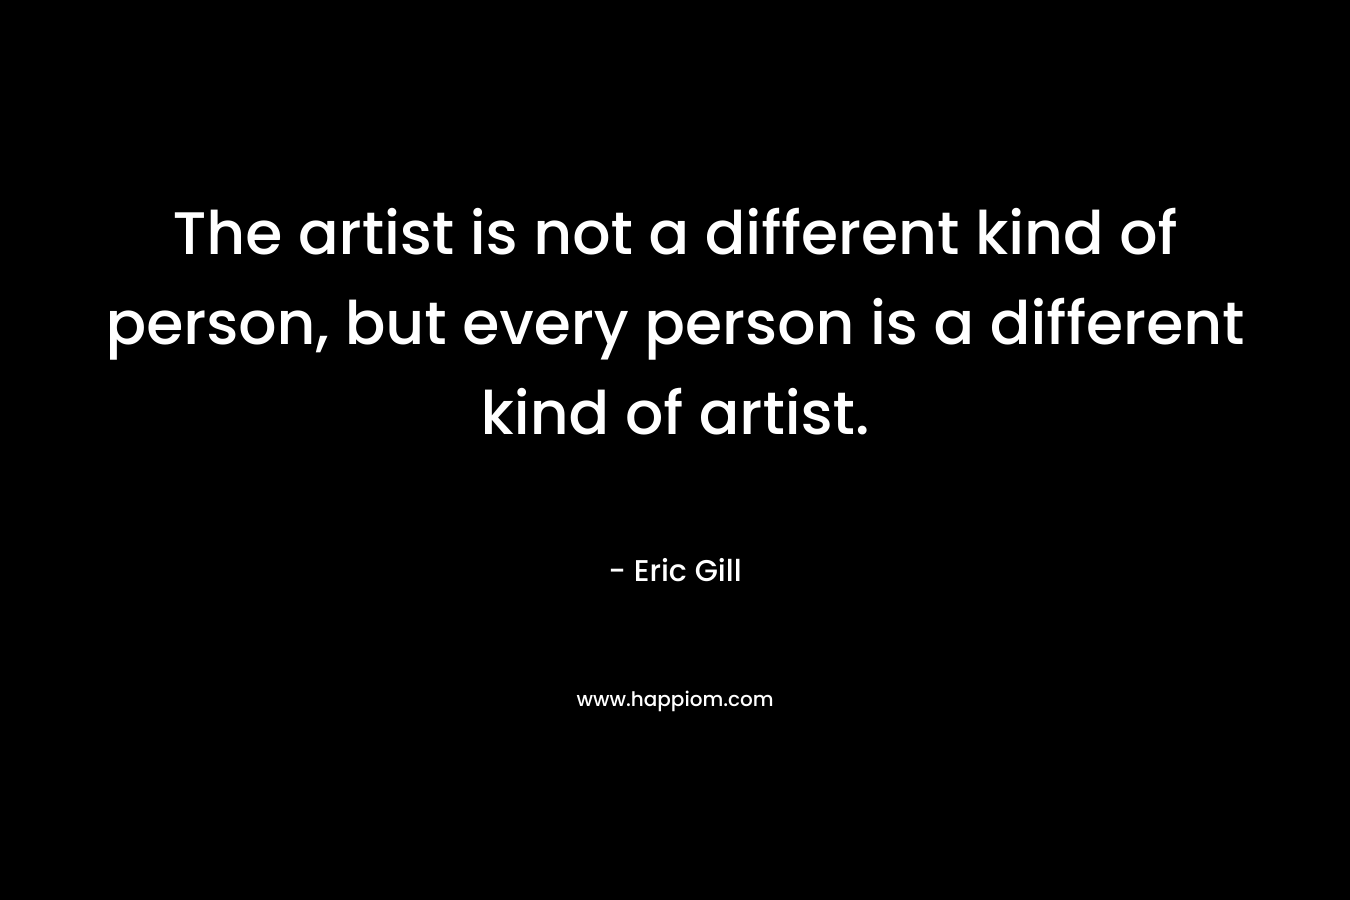 The artist is not a different kind of person, but every person is a different kind of artist. – Eric Gill